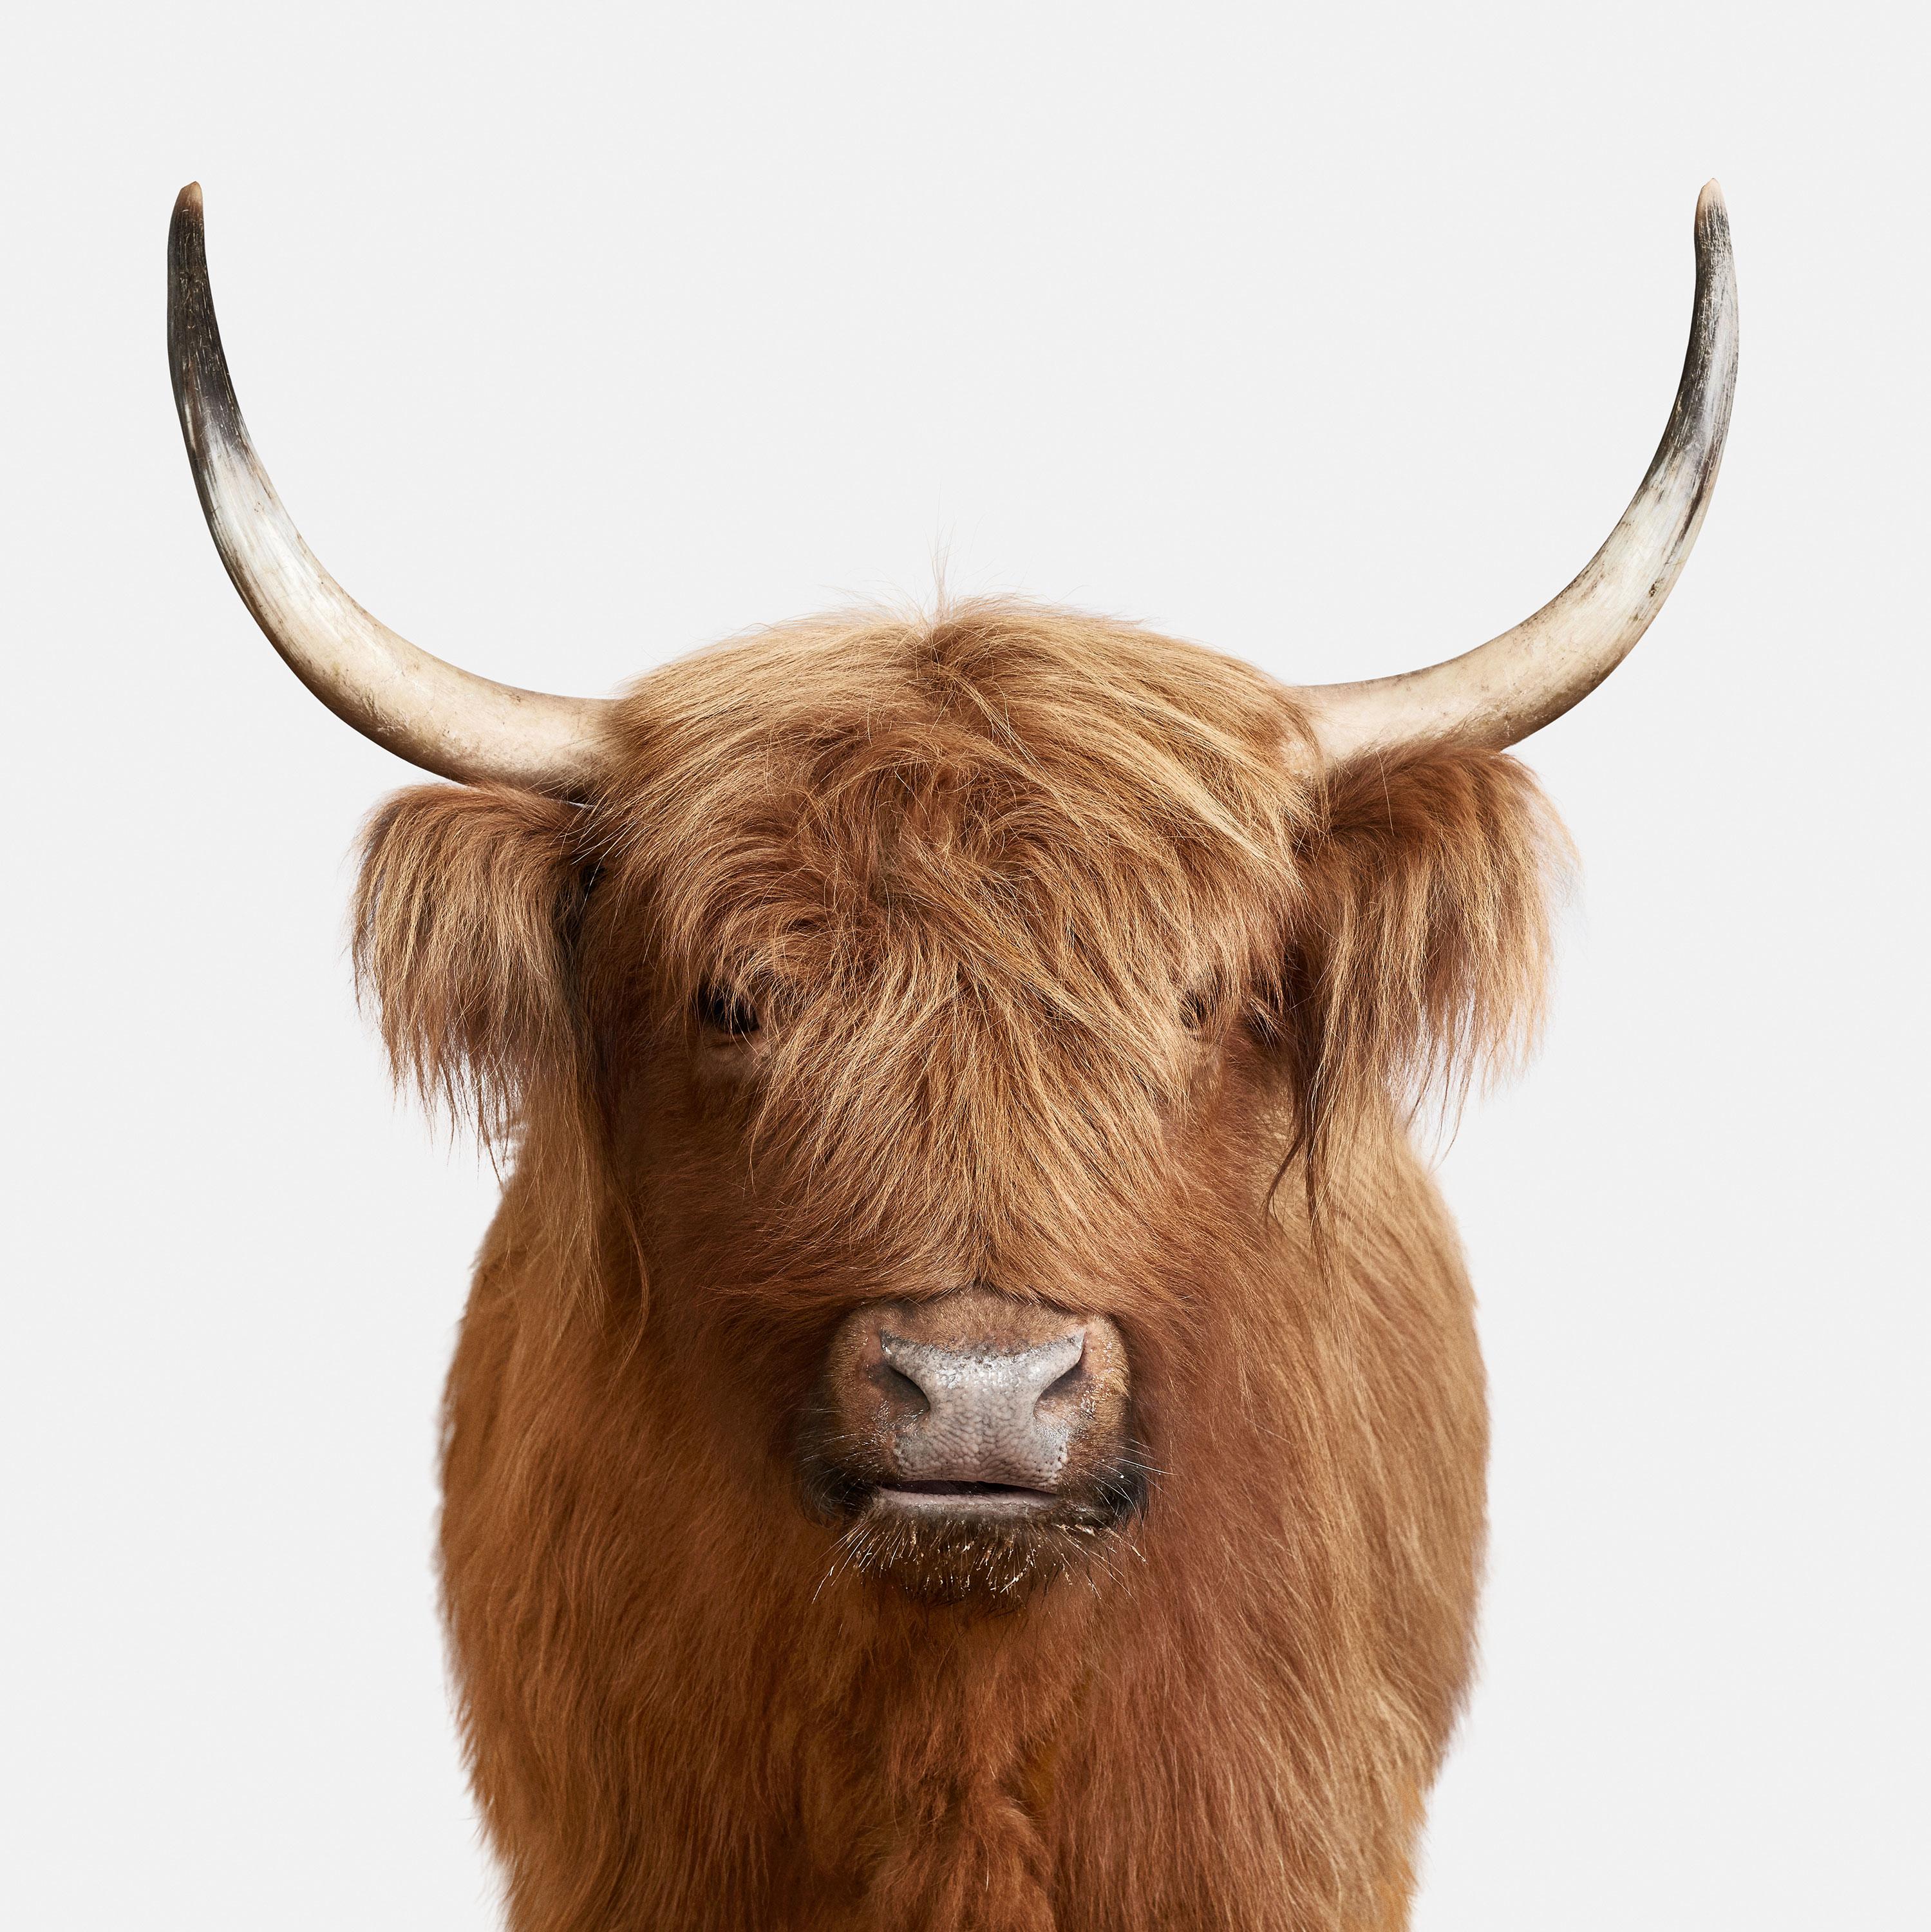 Highland Cow No. 3 - Photograph by Randal Ford